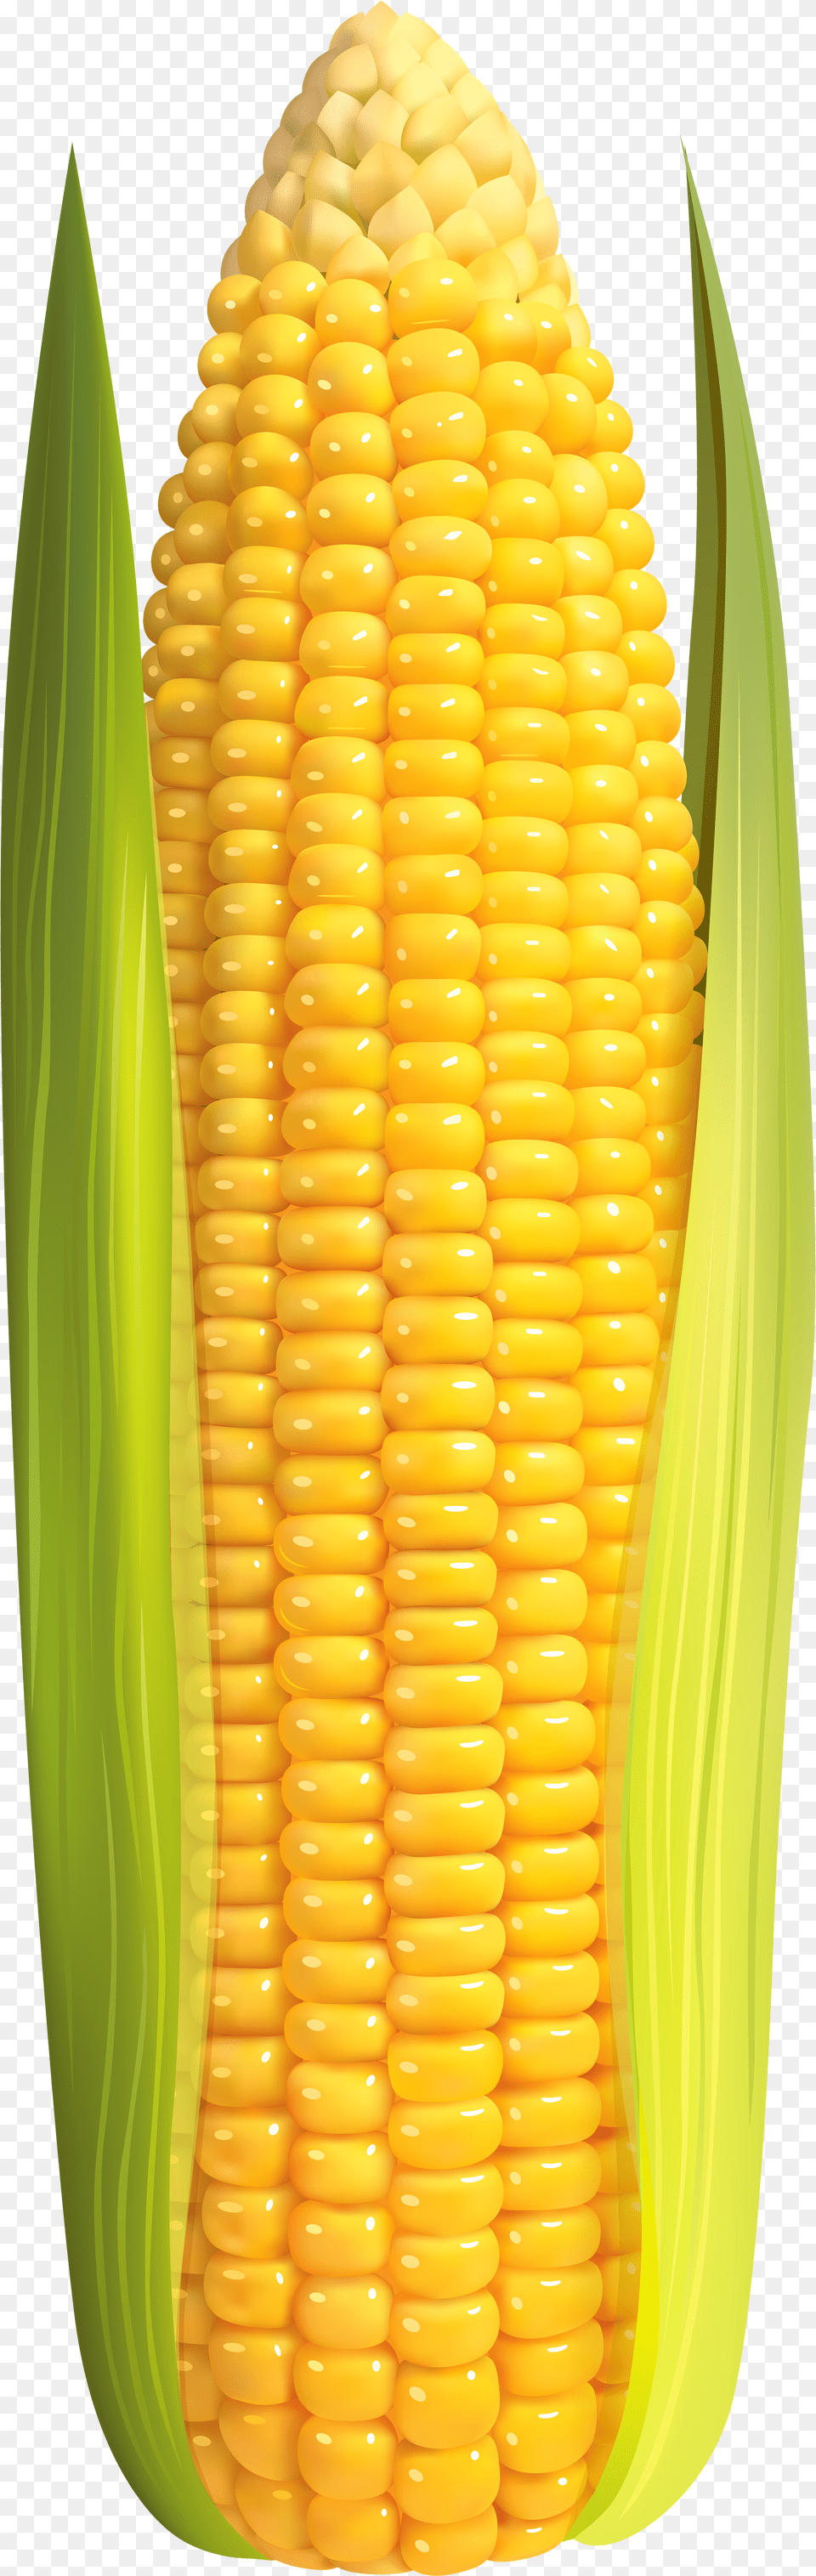 Corn Clip Art High Resolution Corn On The Cob Free Png Download